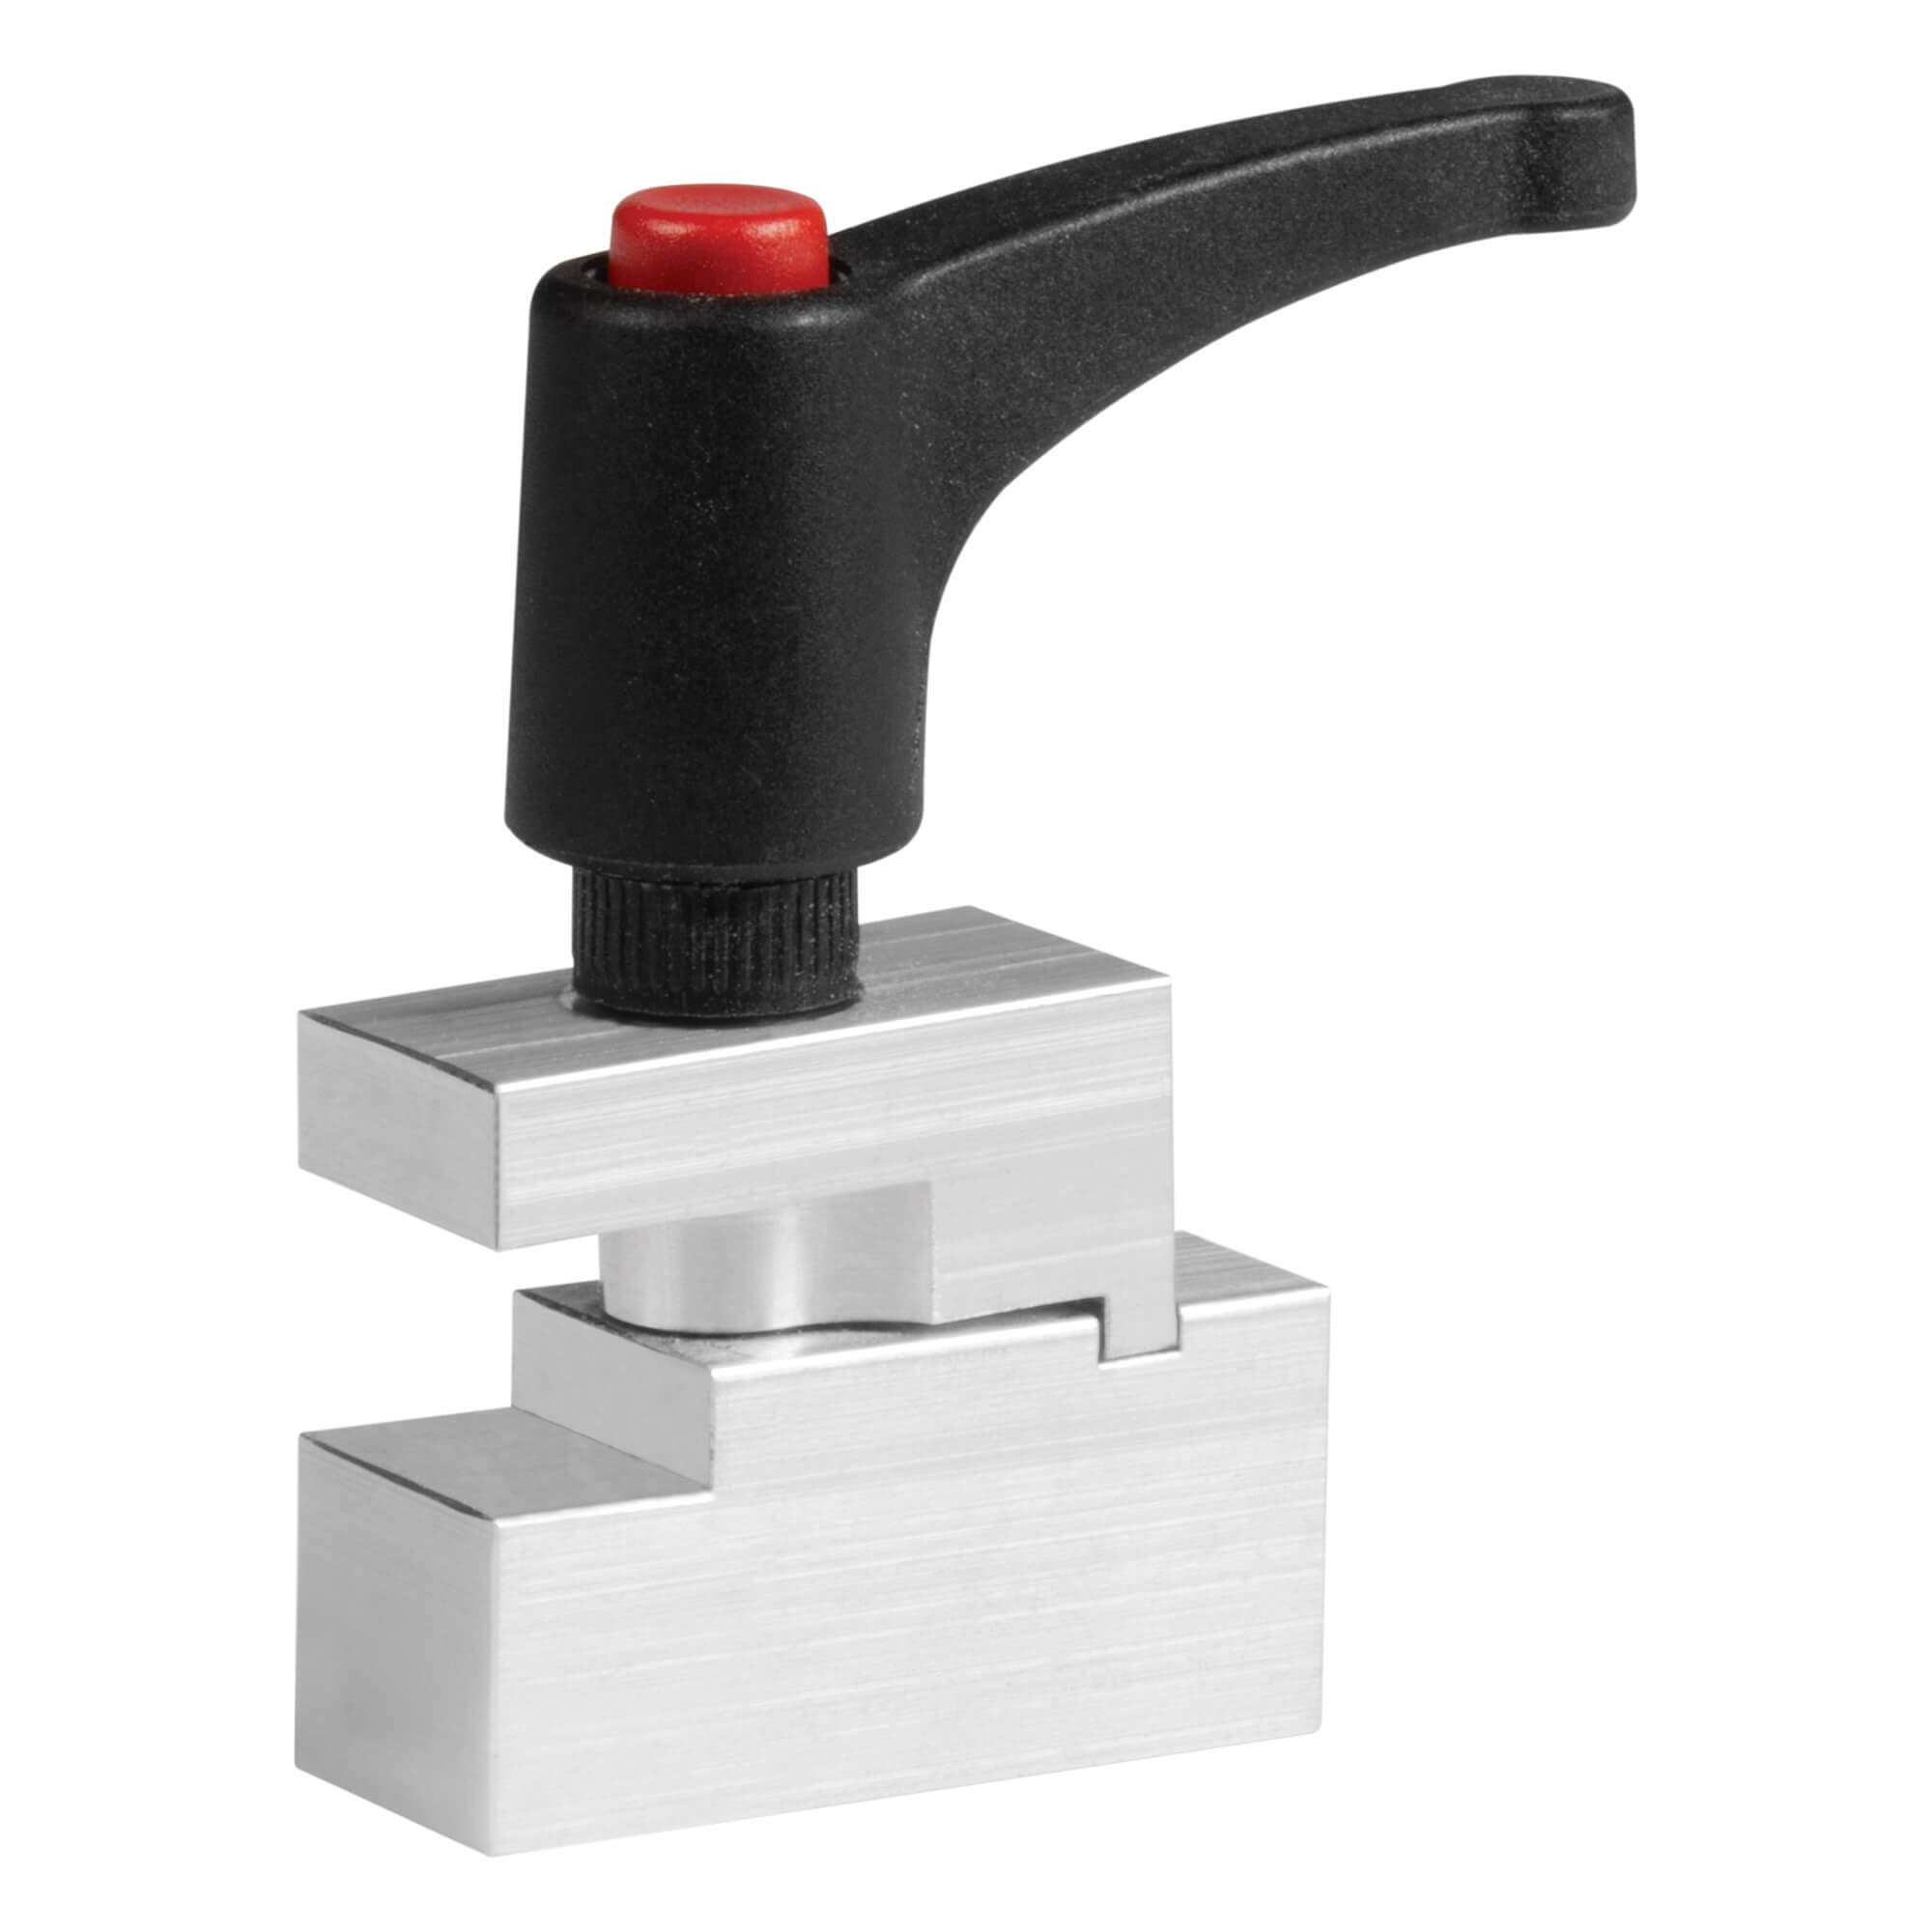 Photos - Bits / Sockets Trend Worktop True Cut Worktop Jig Out of Square Accessory KWJ/OSD 